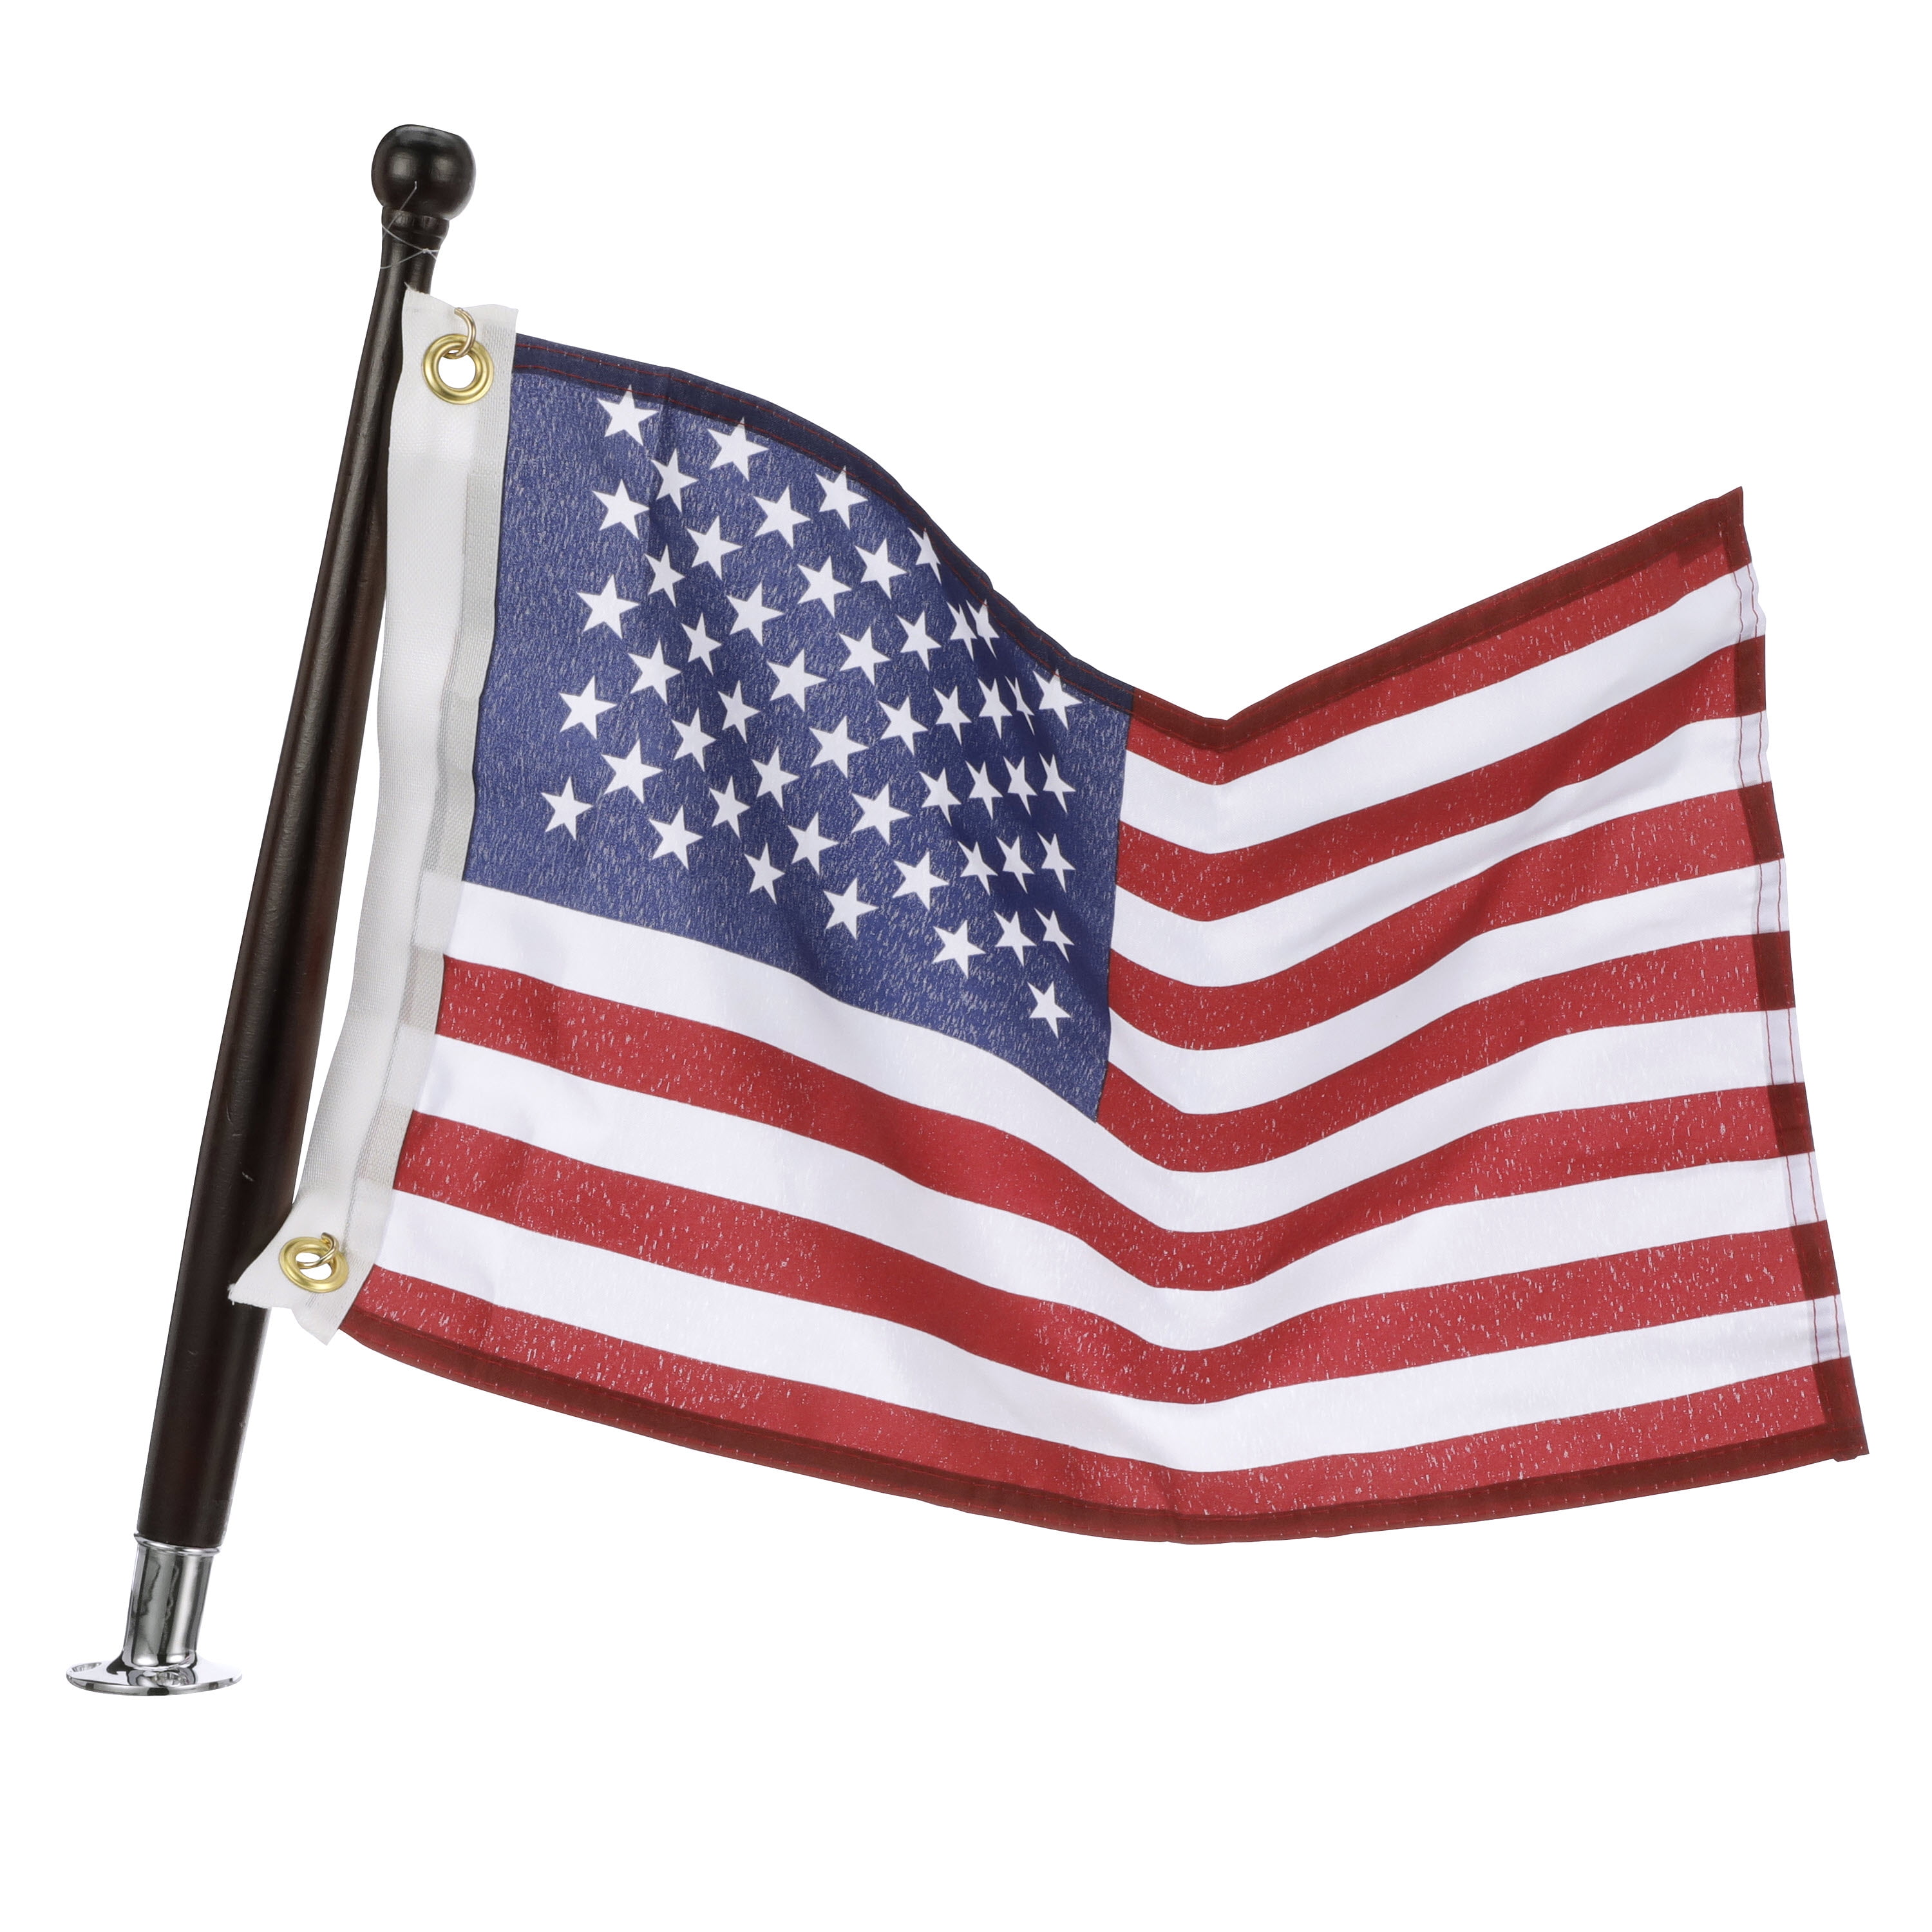 12 Inch x 18 Inch Nylon United States American Flag for Boats